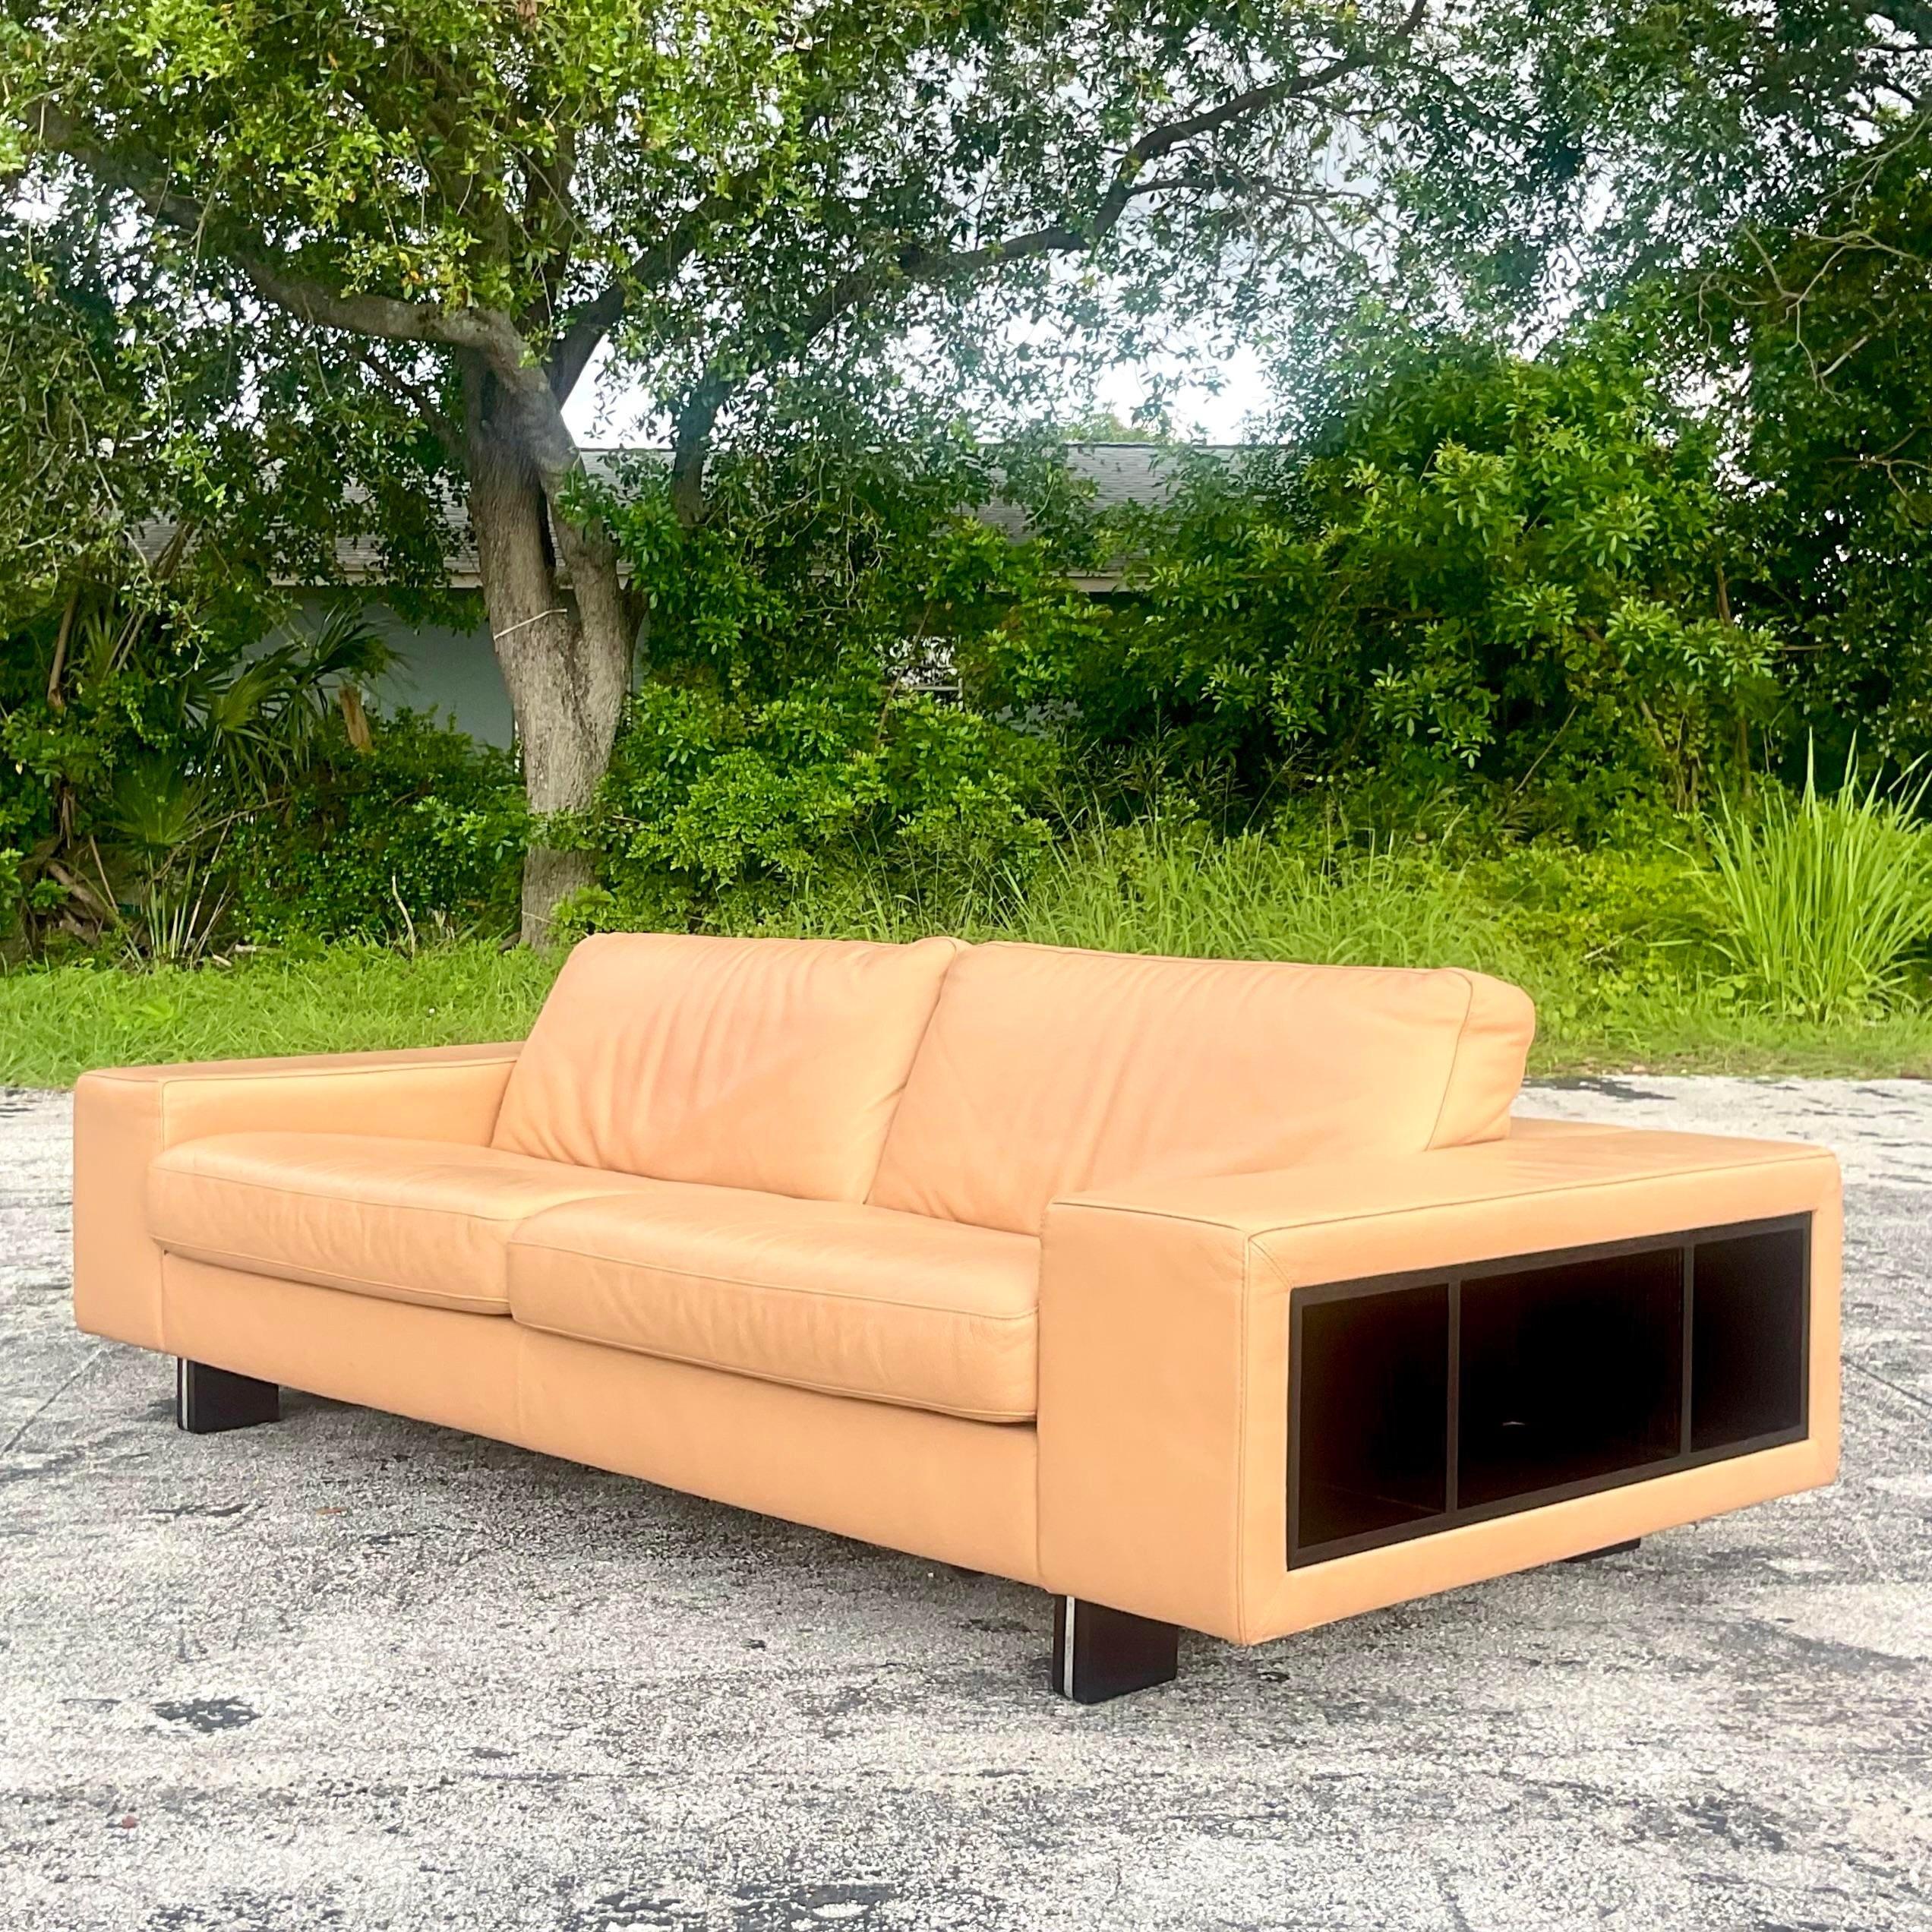 An exceptional vintage Boho leather sofa. Made by the iconic Roche Bobois group and tagged below the seat. A chic low profile in leather with ebony blade legs. Wrap around open cabinets for display. Acquired from a Palm Beach estate.